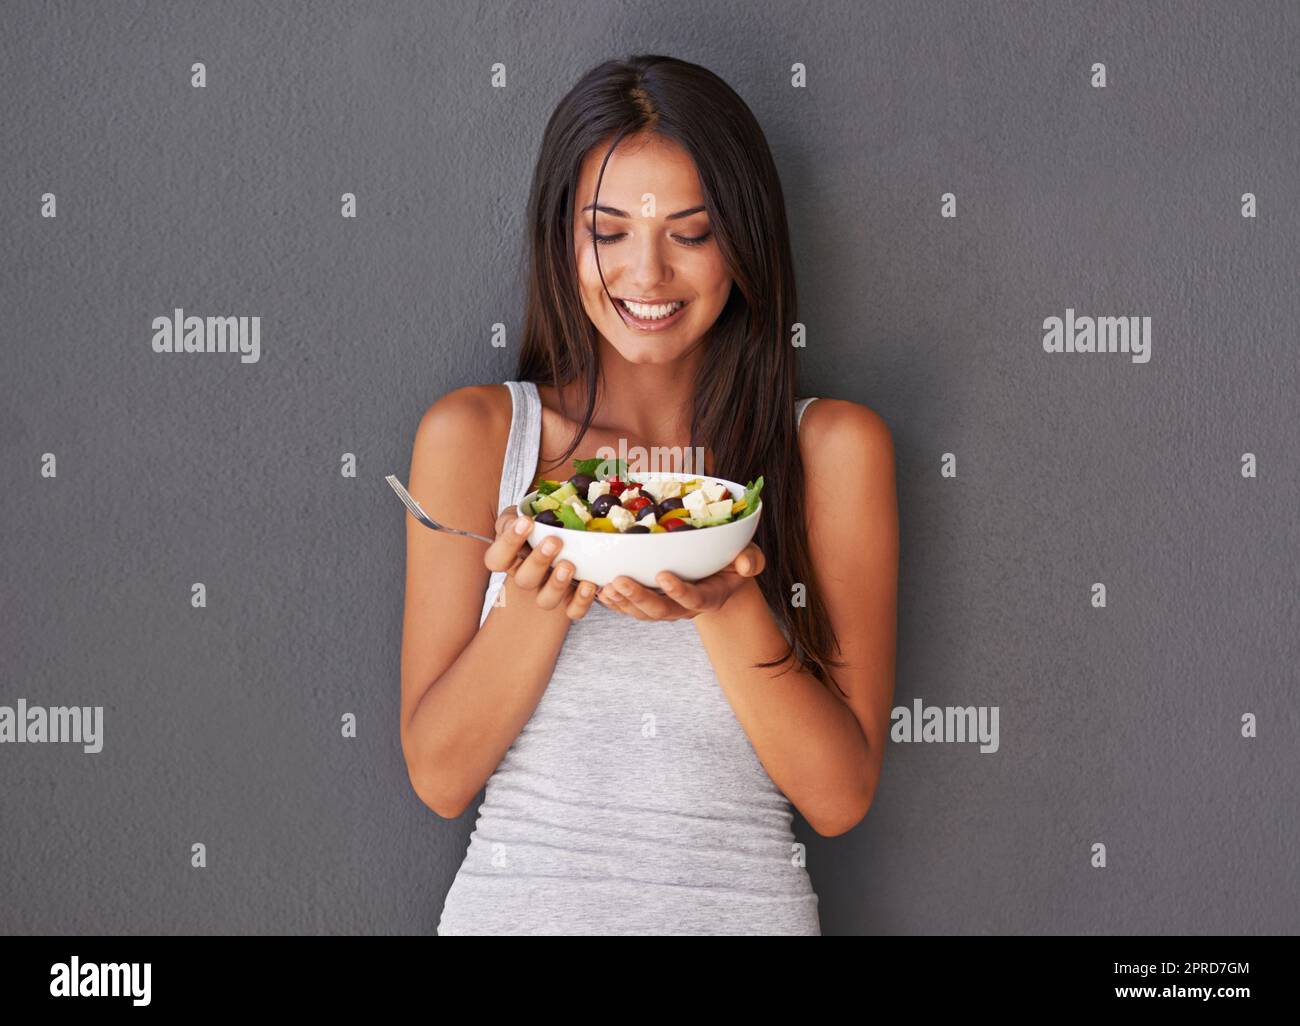 Healthy young female eating her fresh food salad bowl. Smiling beautiful woman holding and enjoying eating her clean green diet dish of vegetables as part of her vegan wellness lifestyle Stock Photo